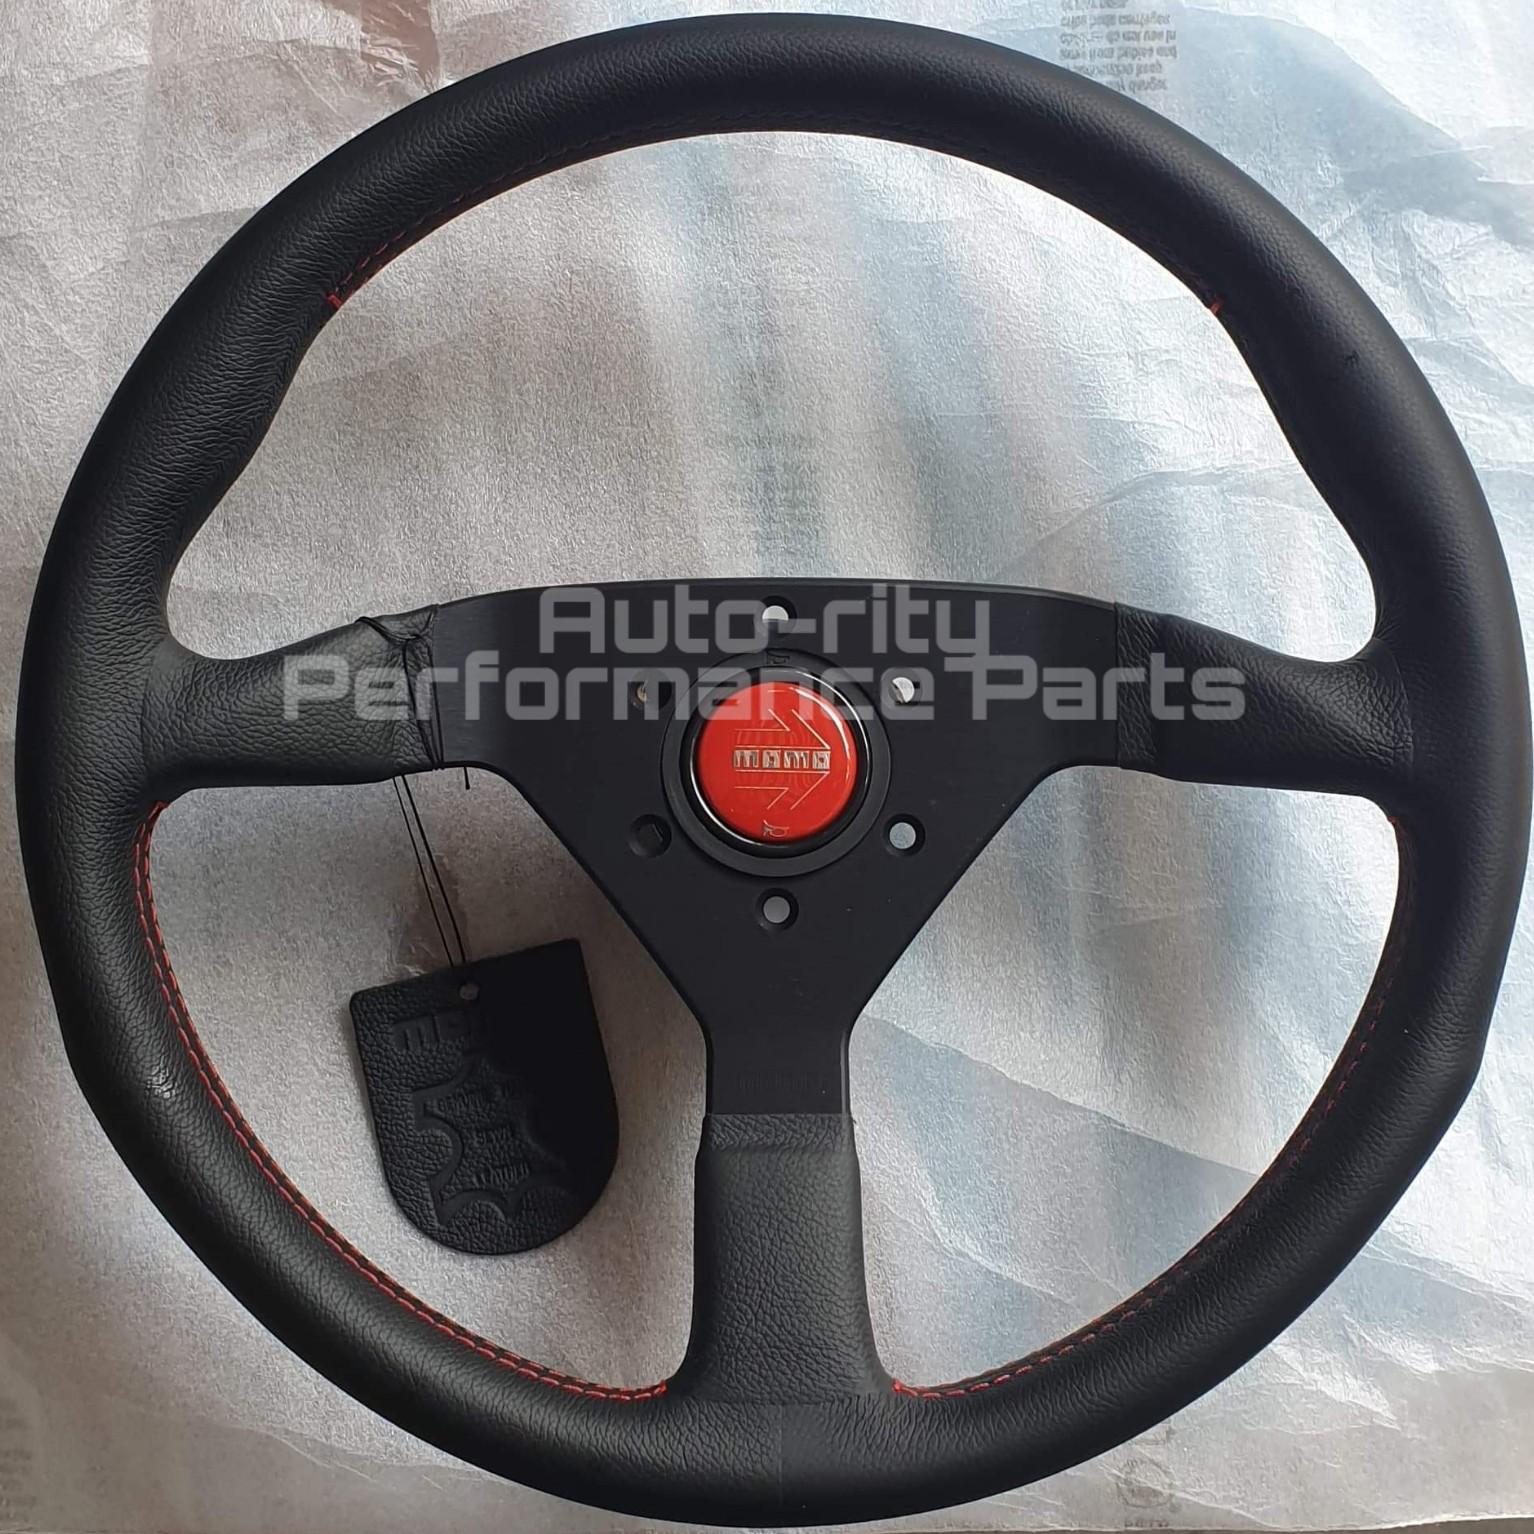 Monte Carlo Momo Steering Wheel 350mm Leather Red Stitch Horn Black Spoke Car Truck Parts Bennysberries Car Truck Interior Parts